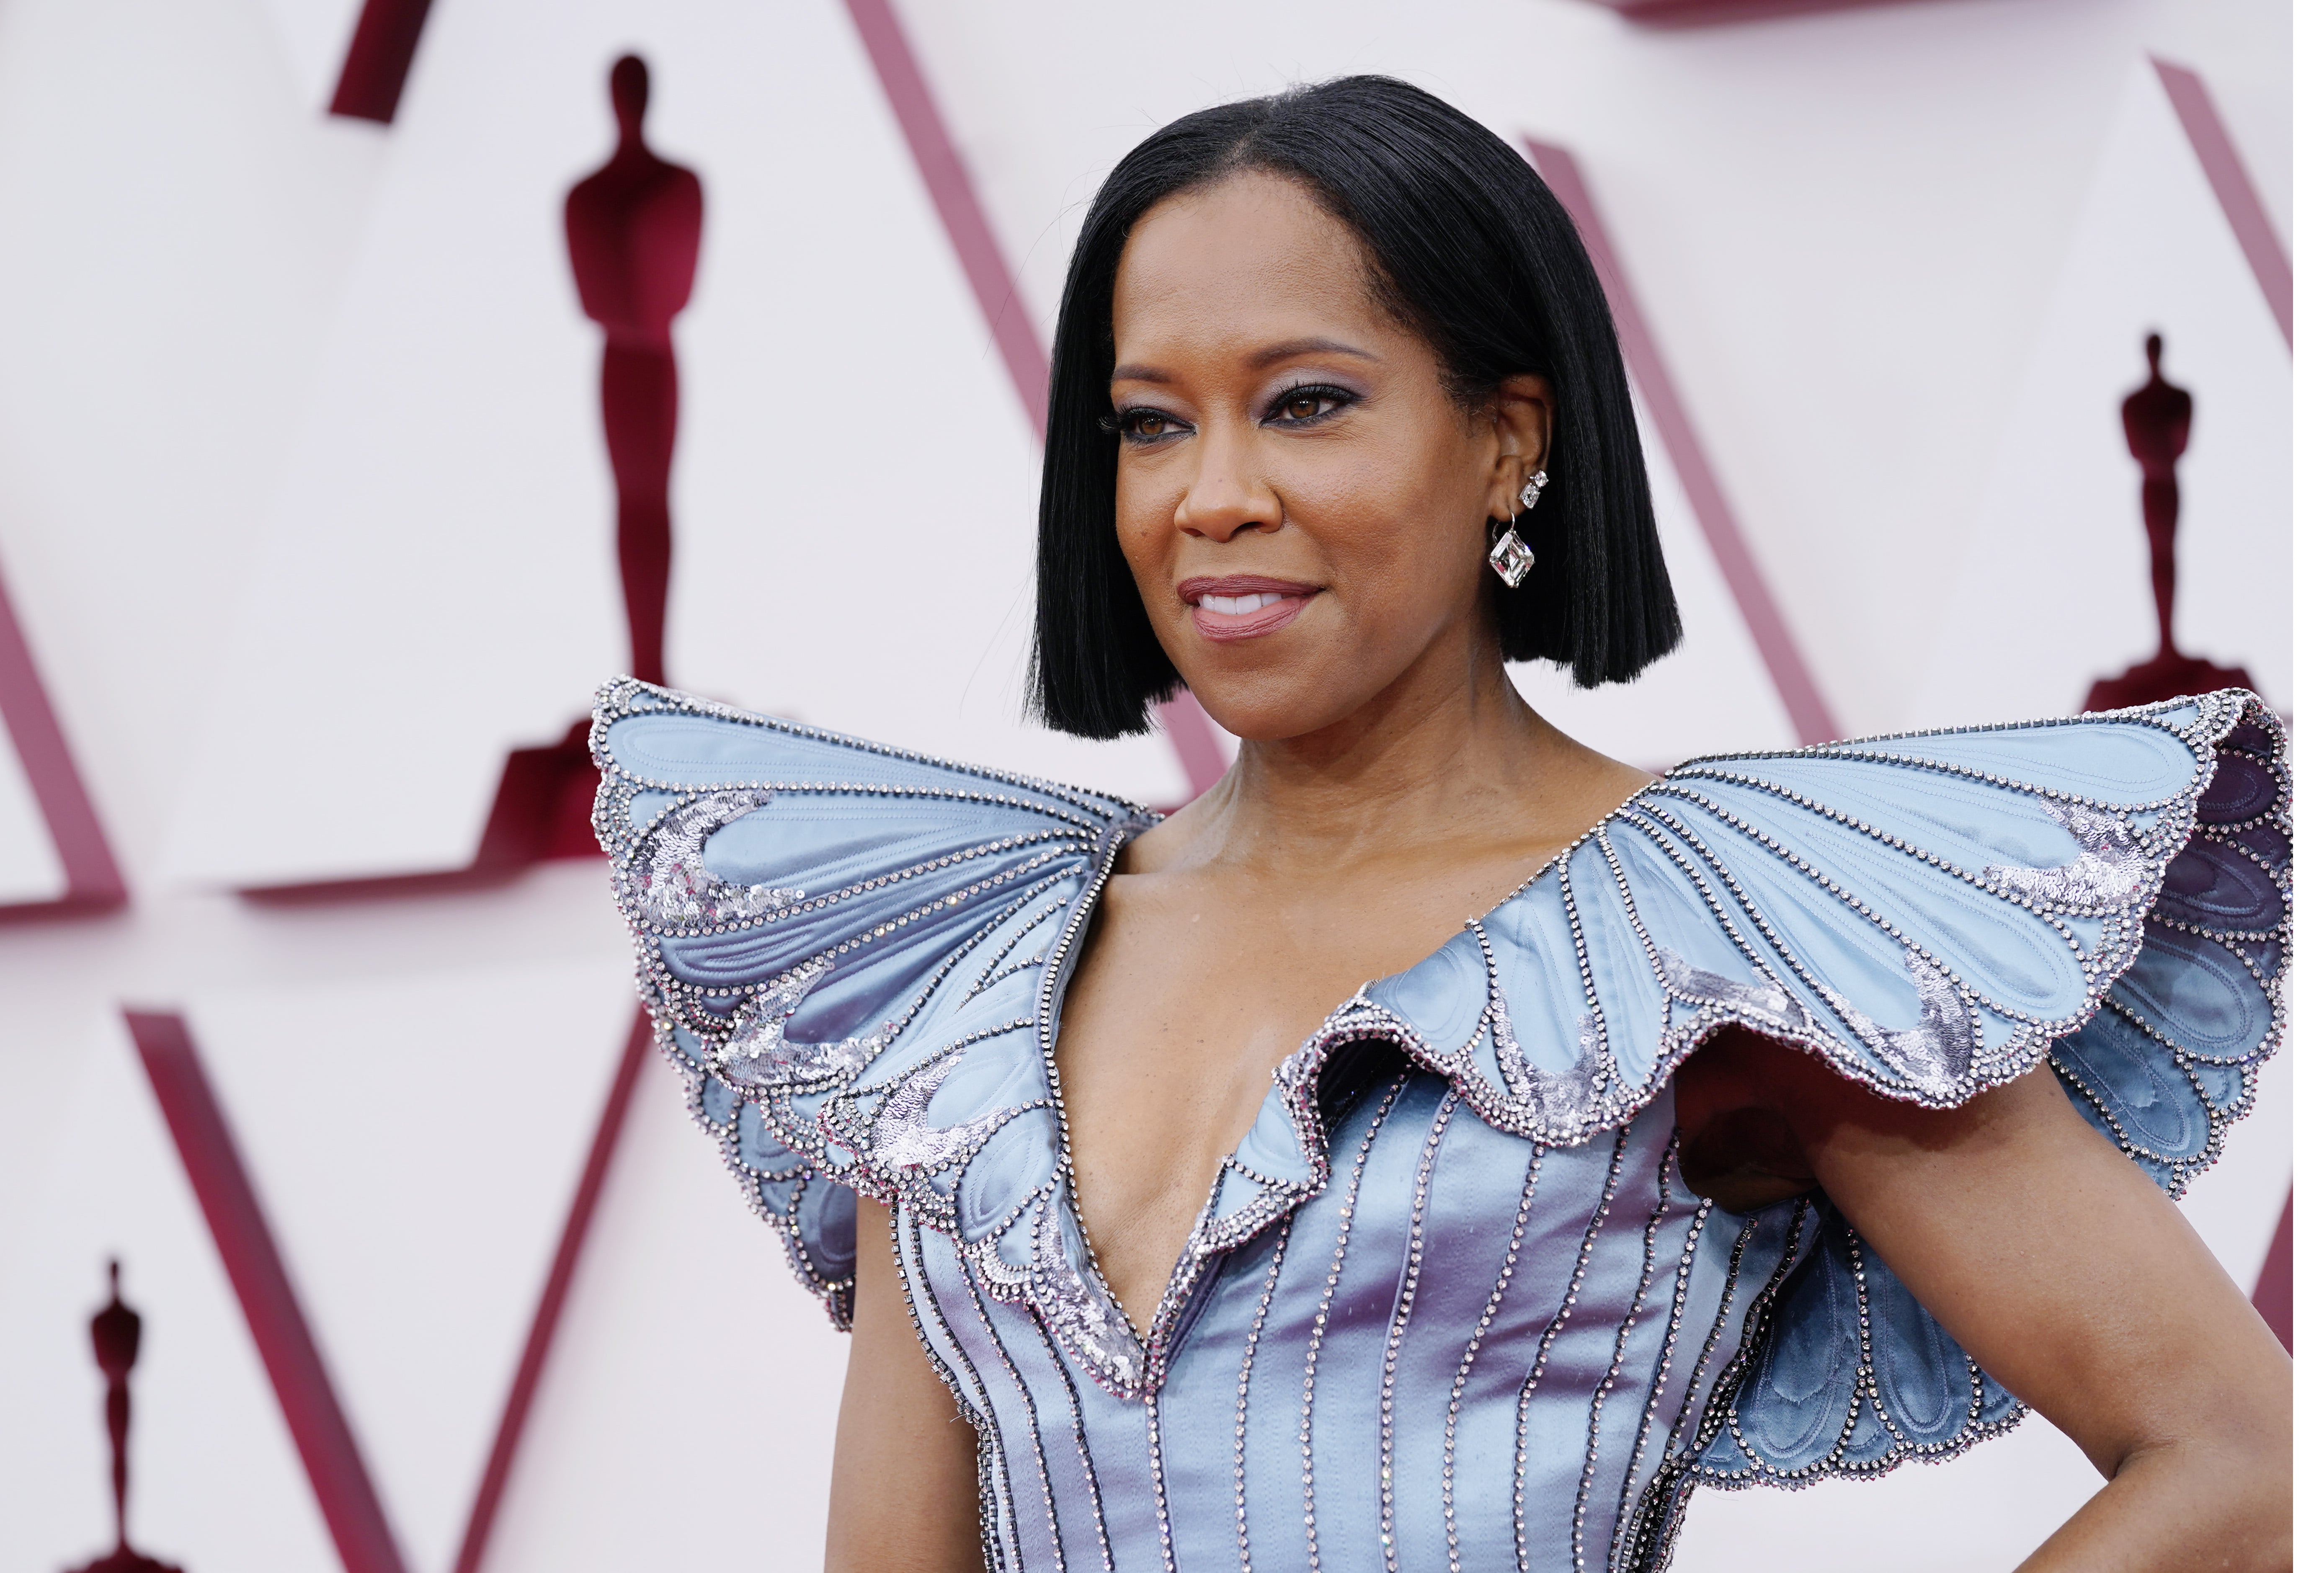 Regina King Wows in a Baby Blue Butterfly Gown at the Oscars 2021